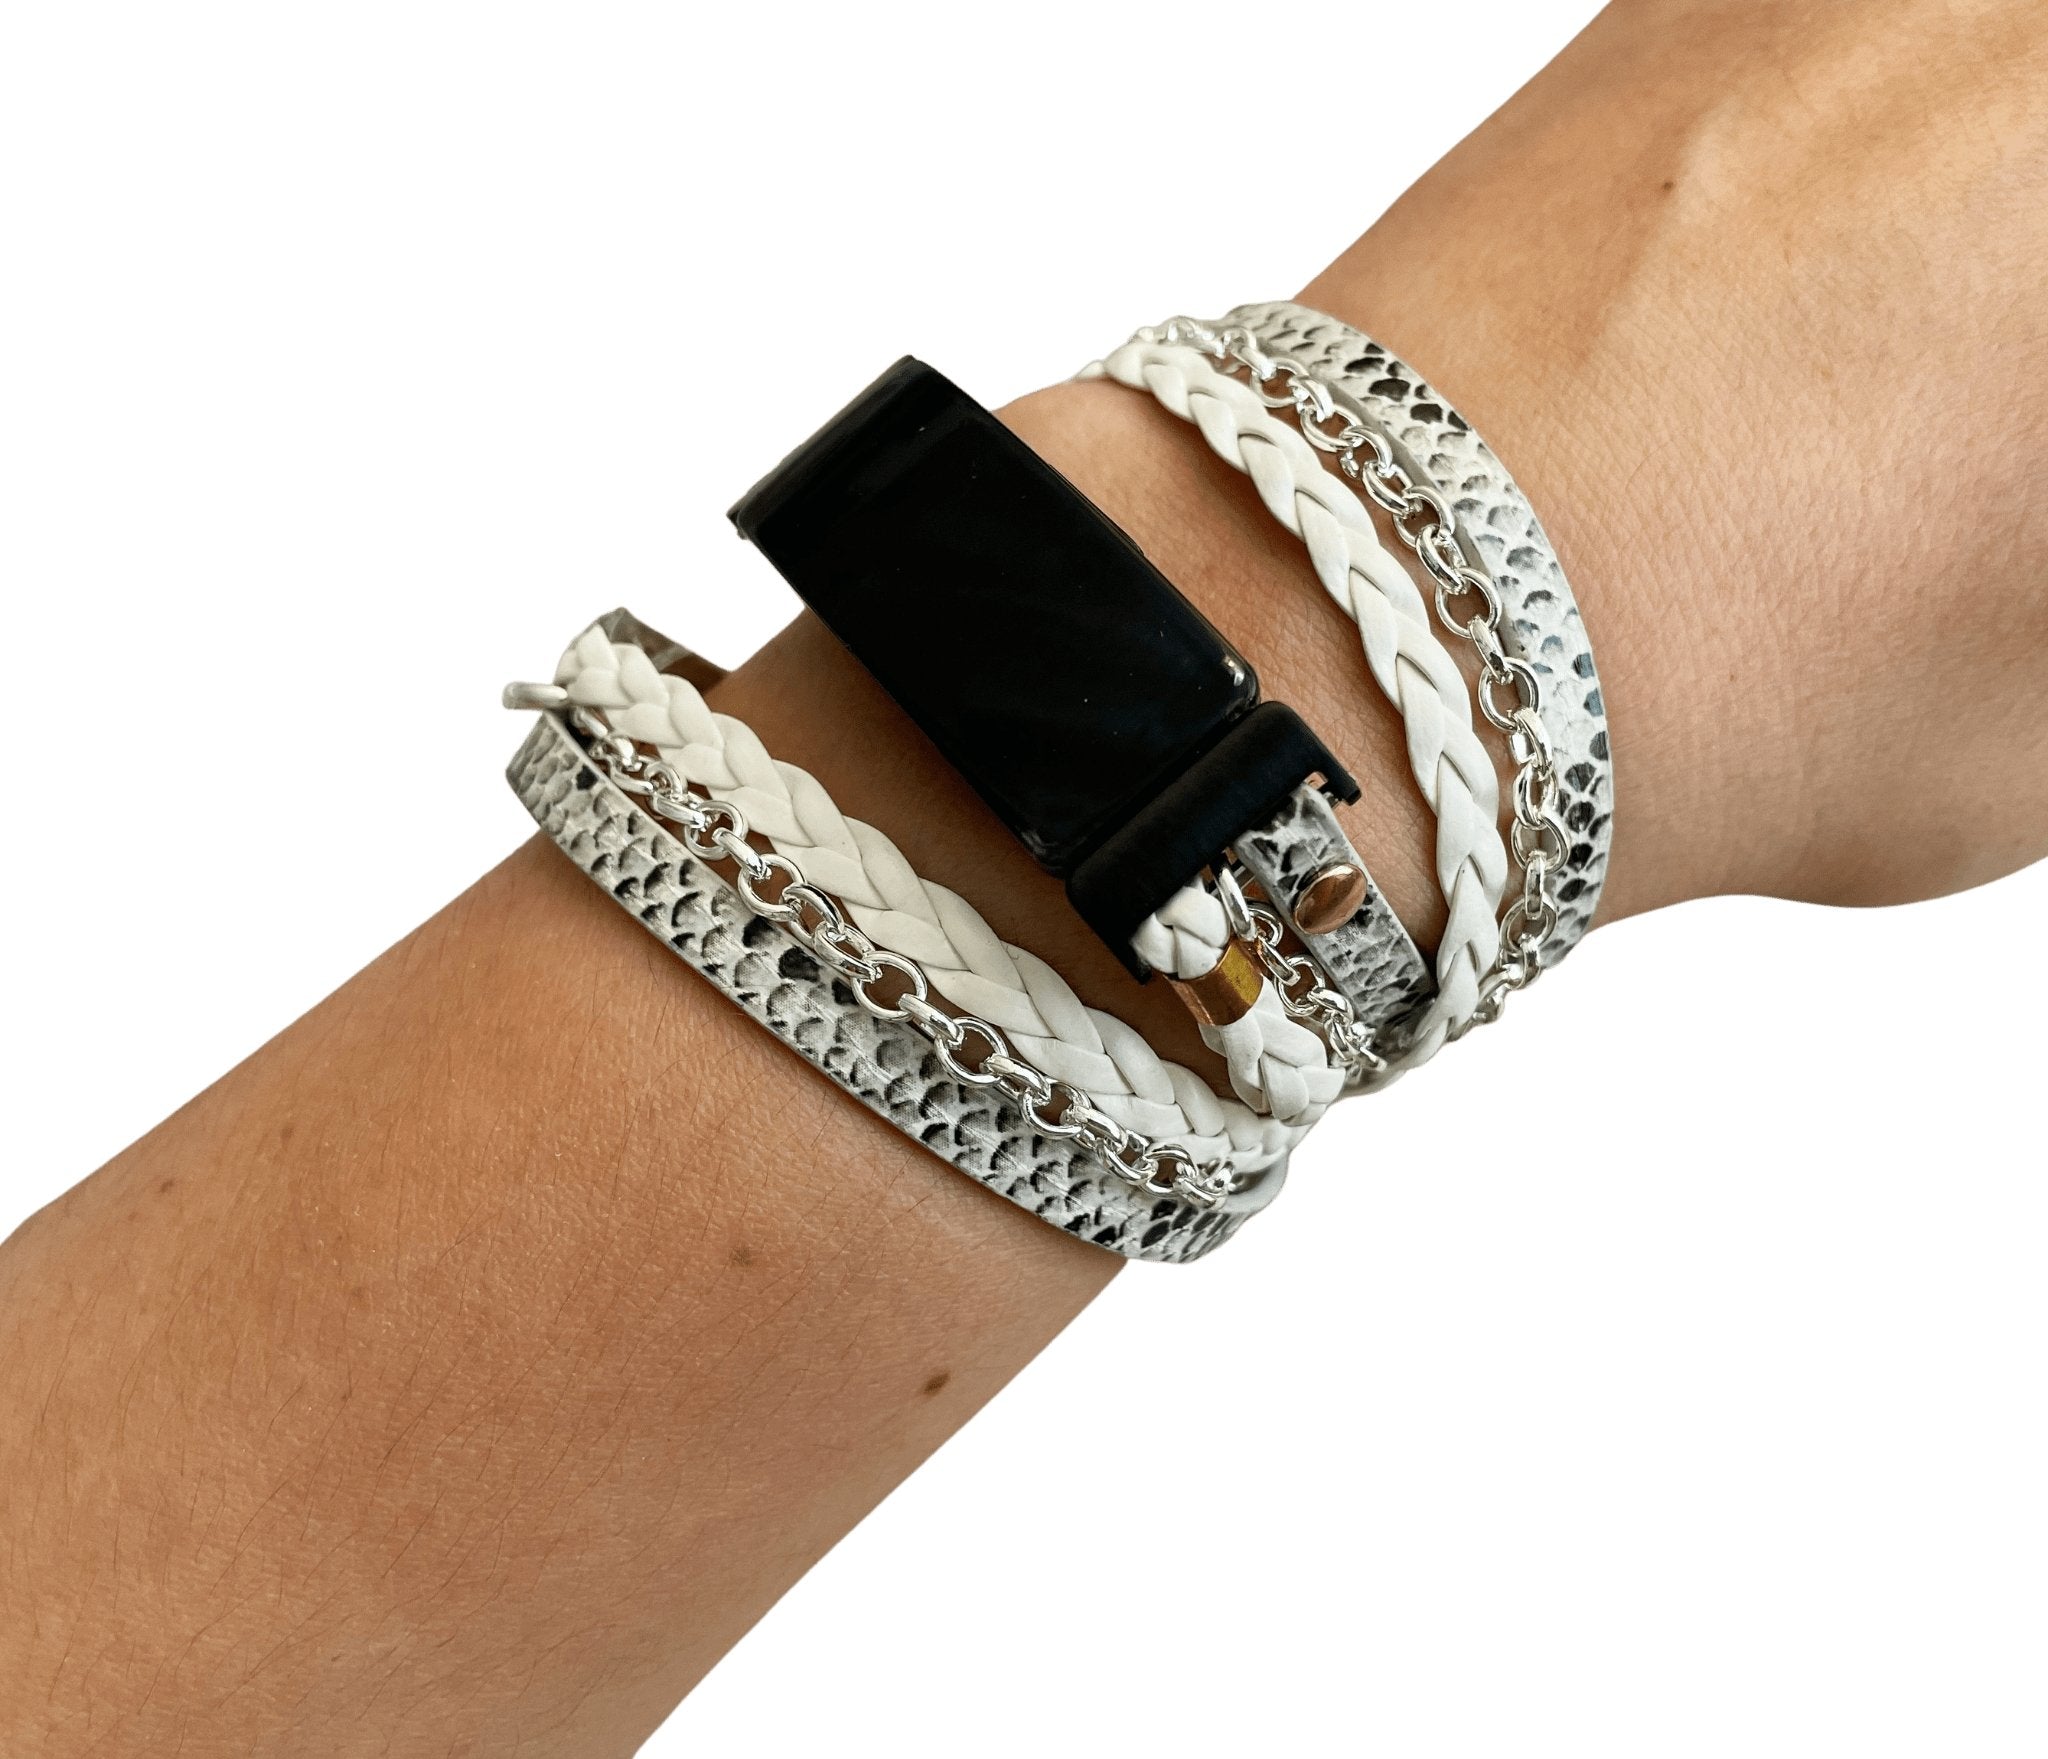 Boho Chic White Snakeskin LeatherWatch Band with Silver Chain for Fitbit Luxe - Mareevo